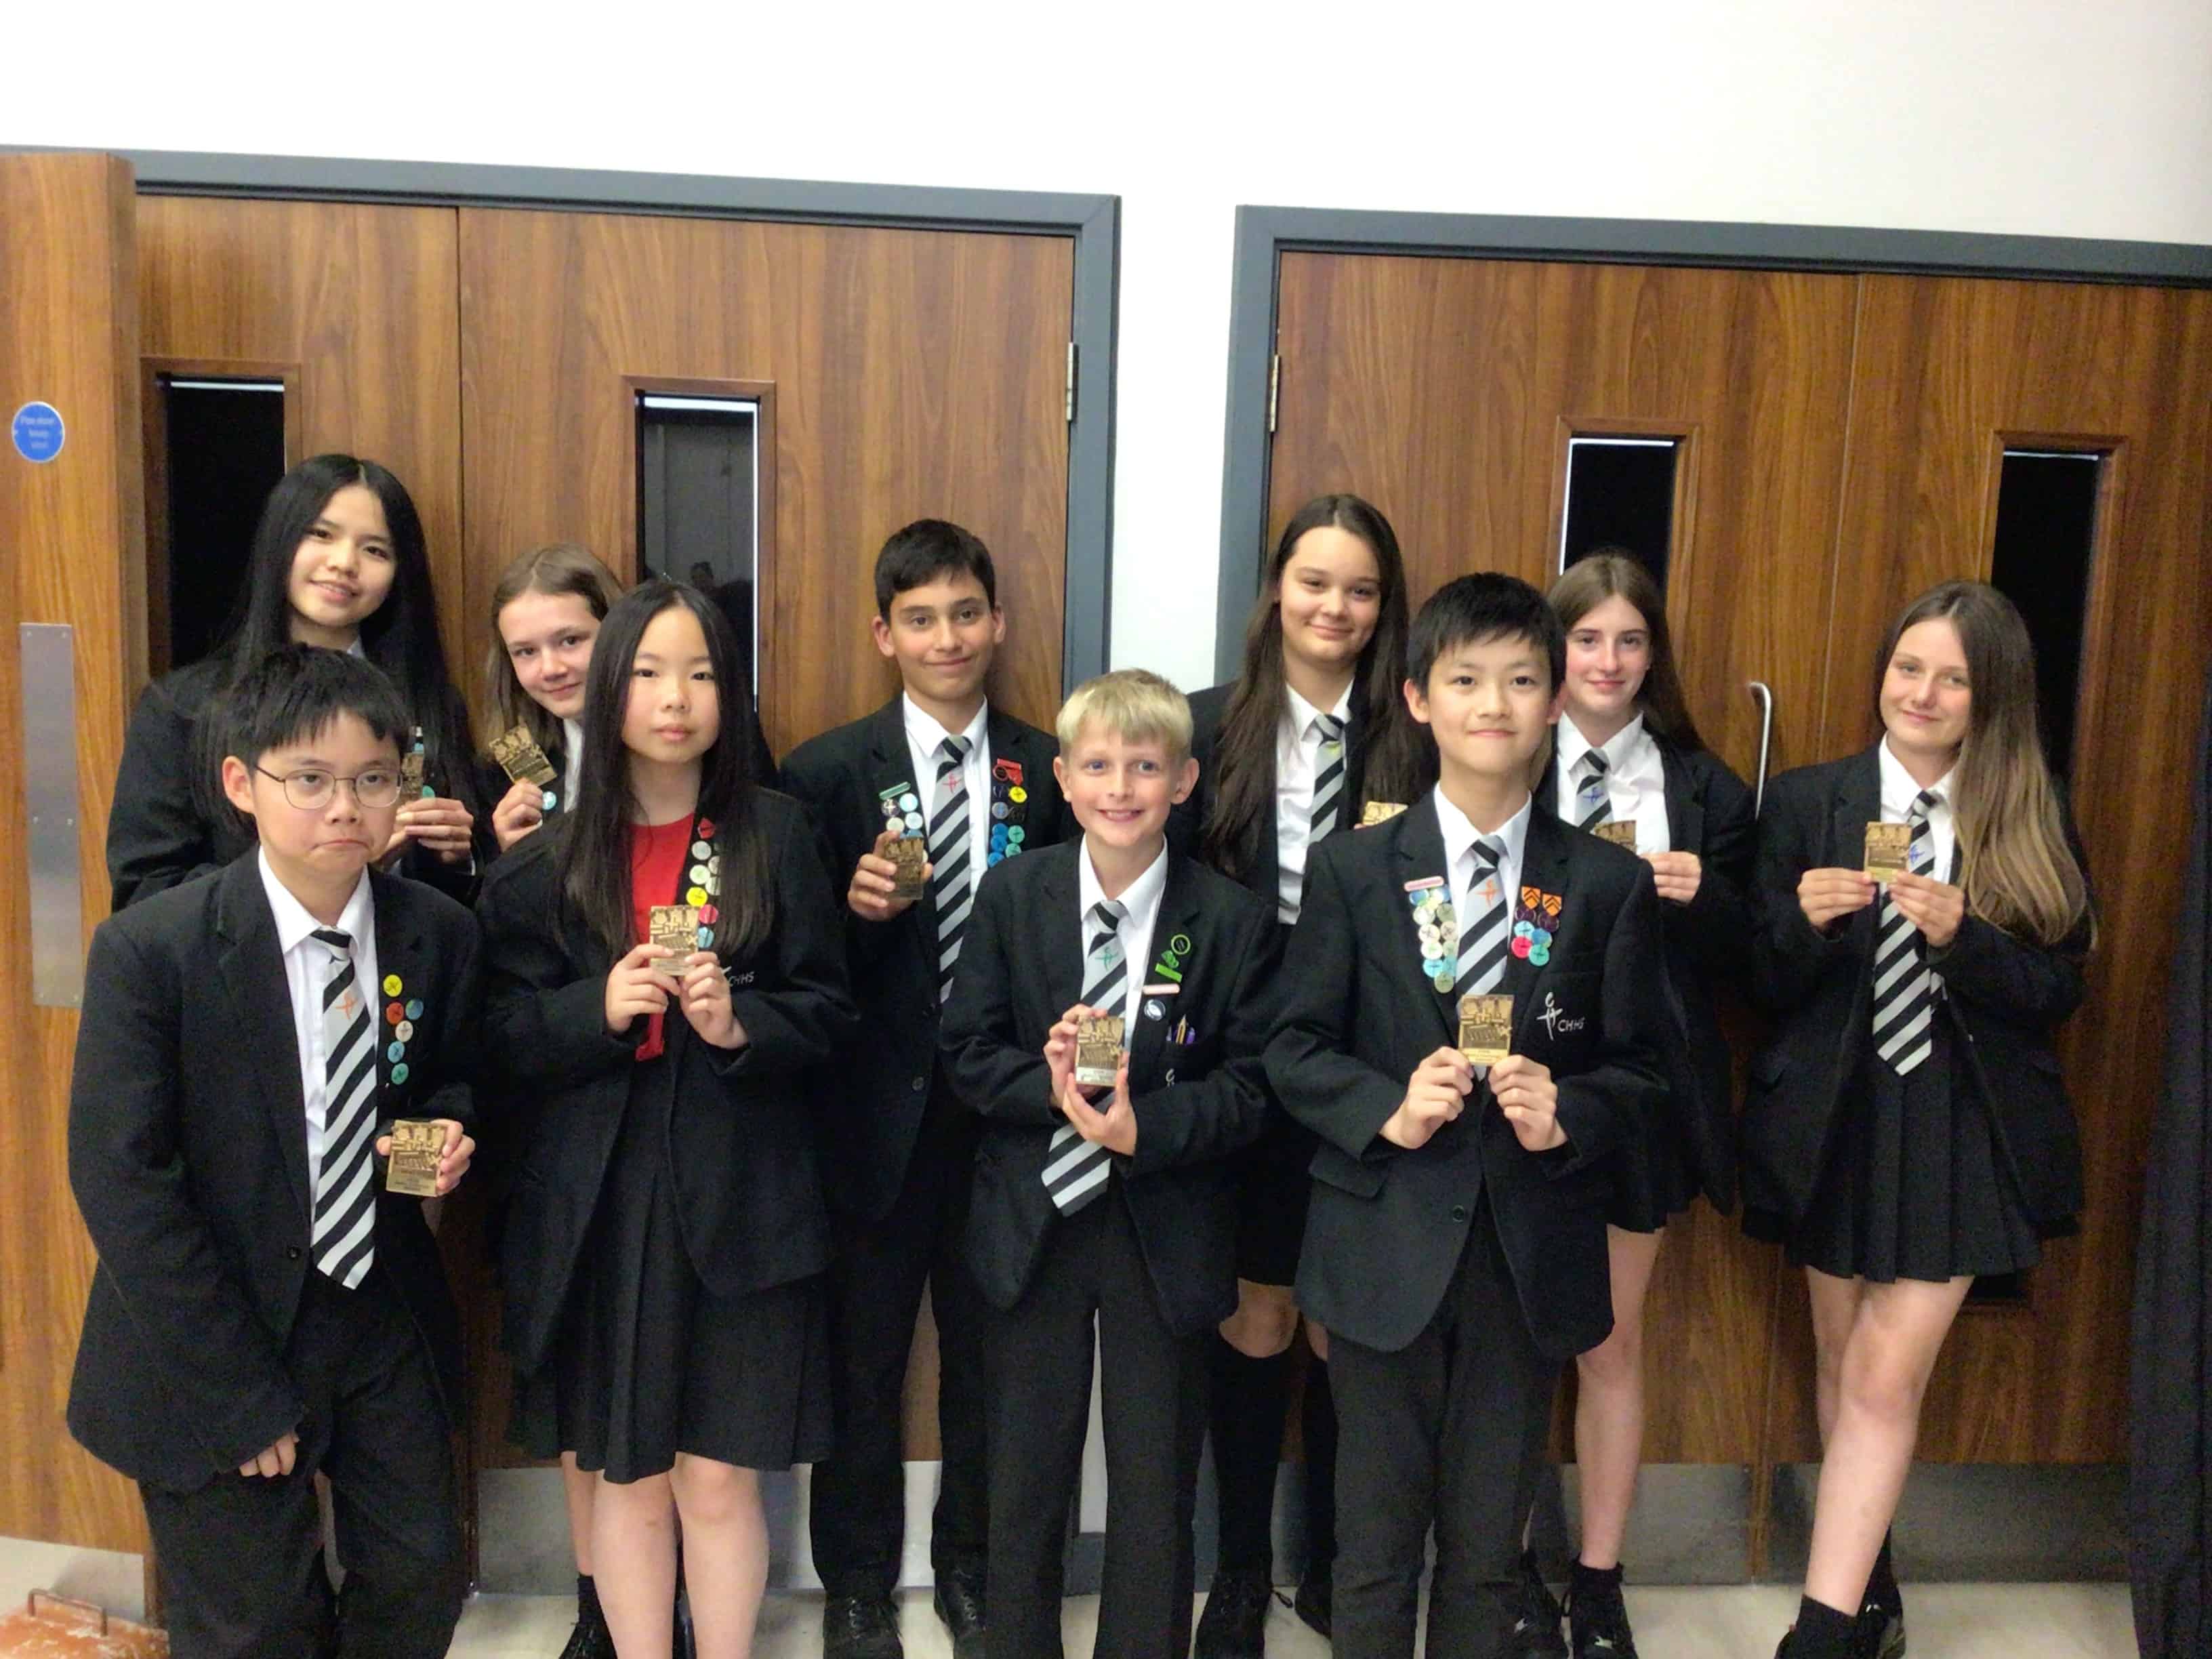 CHHS students smile with their Maths Award magnets that they earned at the Cheadle Hulme High School Maths Award Evening.